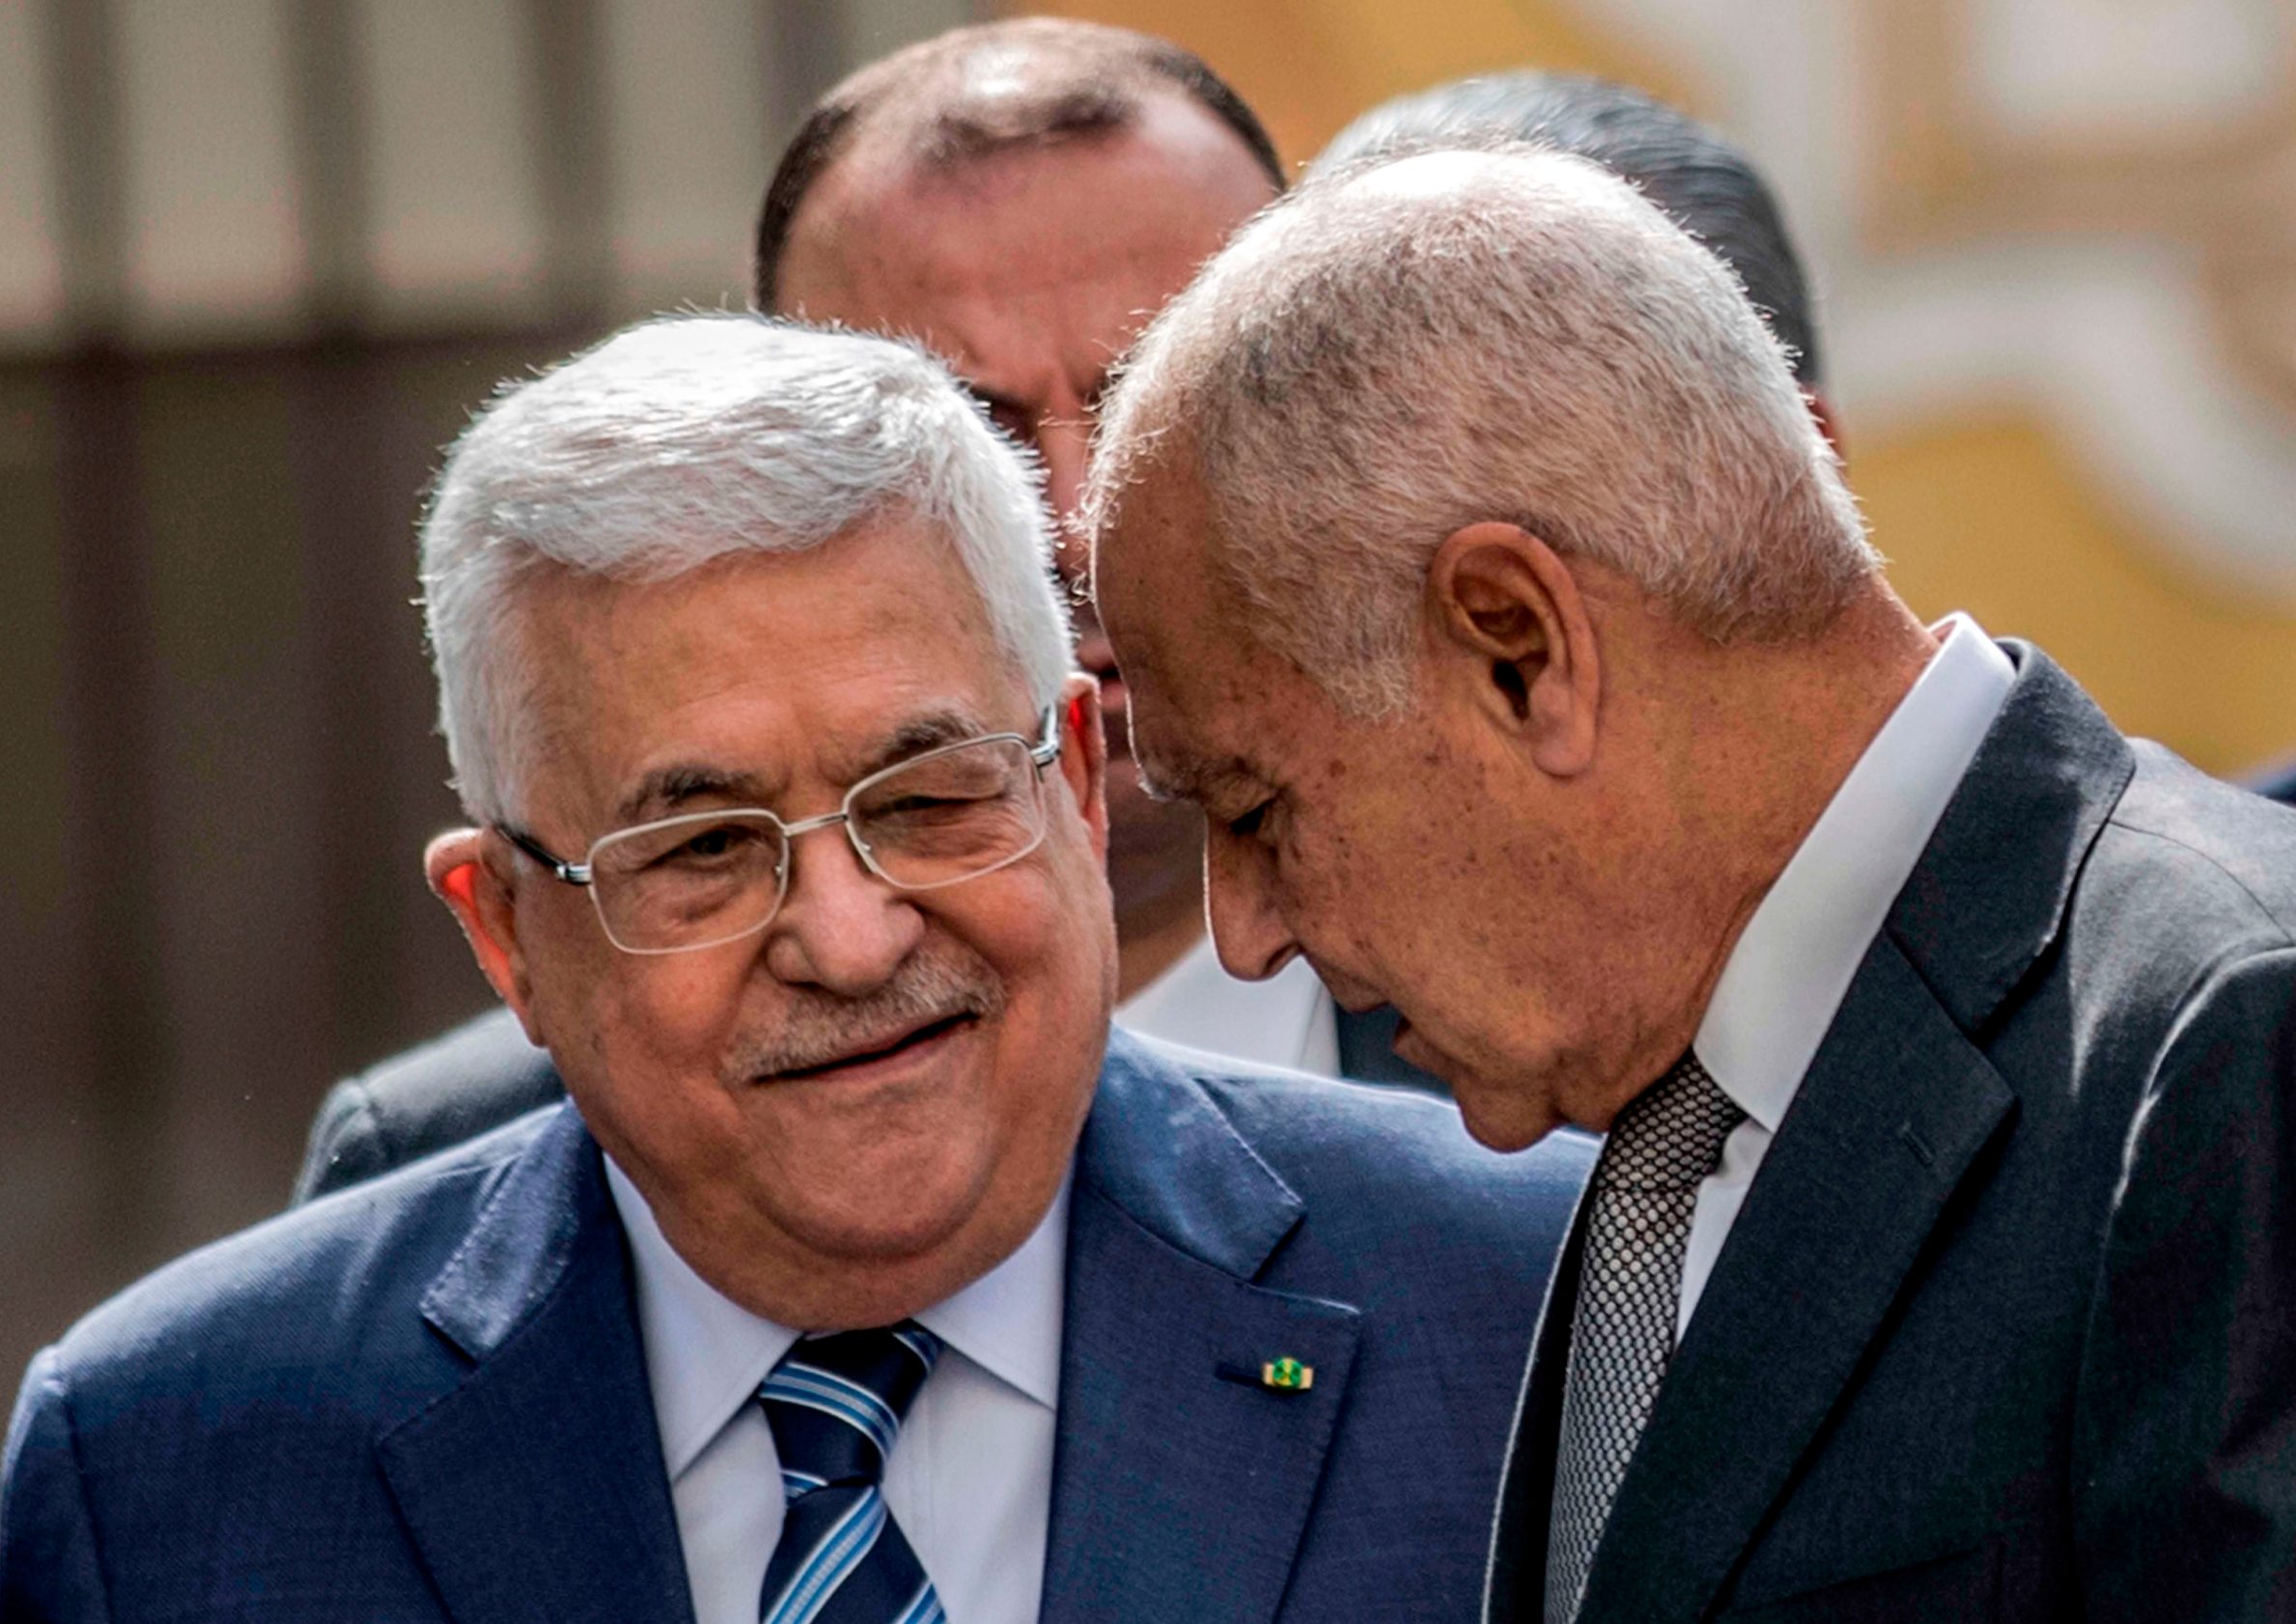 Palestinian president Mahmud Abbas (L) speaks with Arab League Secretary-General Ahmed Aboul Gheit as they arrive to attend an Arab League emergency meeting discussing the US-brokered proposal for a settlement of the Middle East conflict at the league headquarters in the Egyptian capital Cairo on February 1, 2020. (Photo by Khaled DESOUKI / AFP)